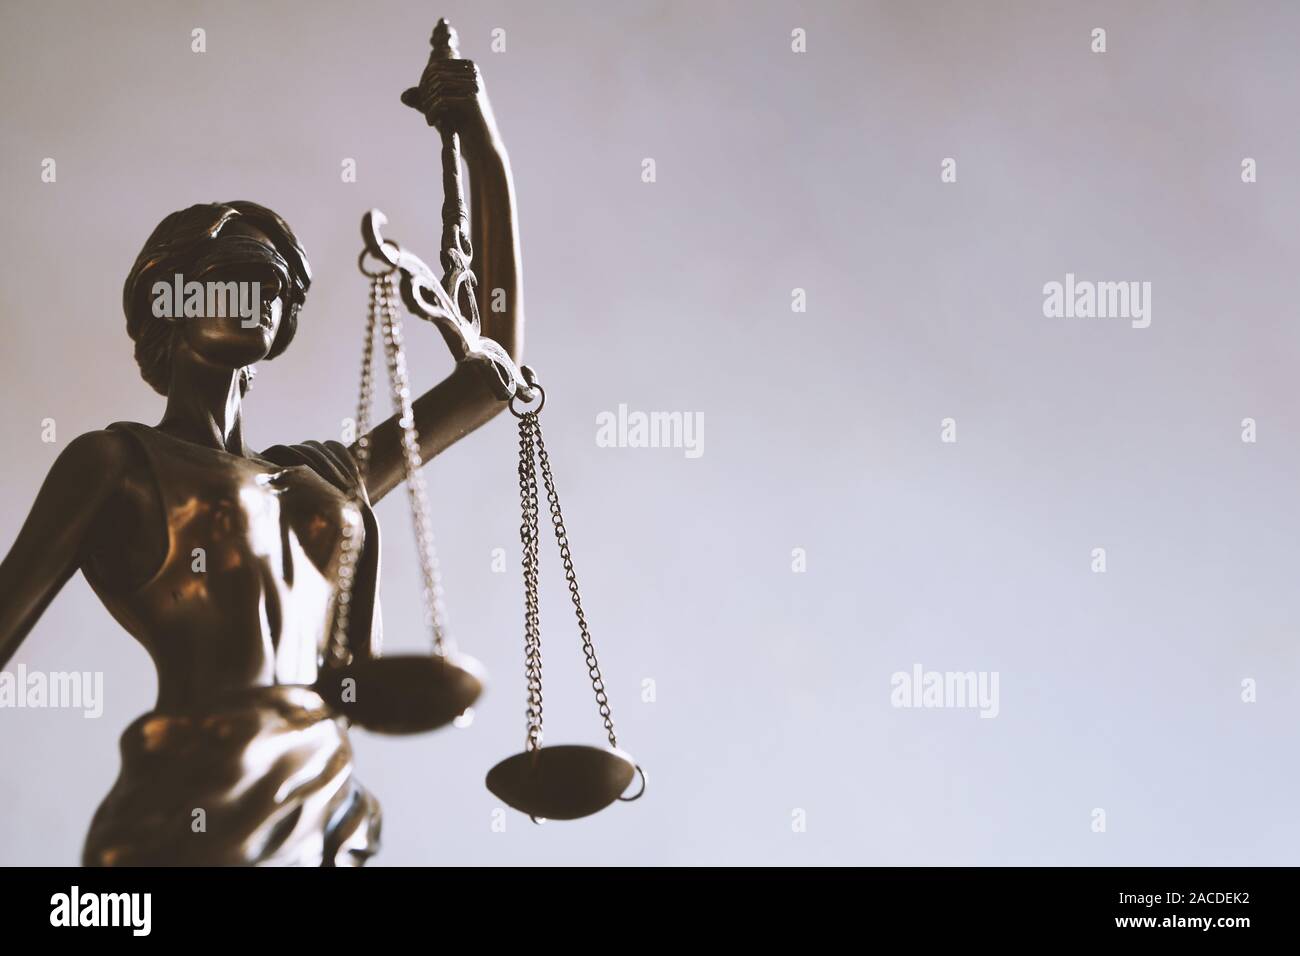 lady justice or justitia - blindfolded figurine holding balance scales - law jurisprudence and impartiality symbol - background with copy space Stock Photo